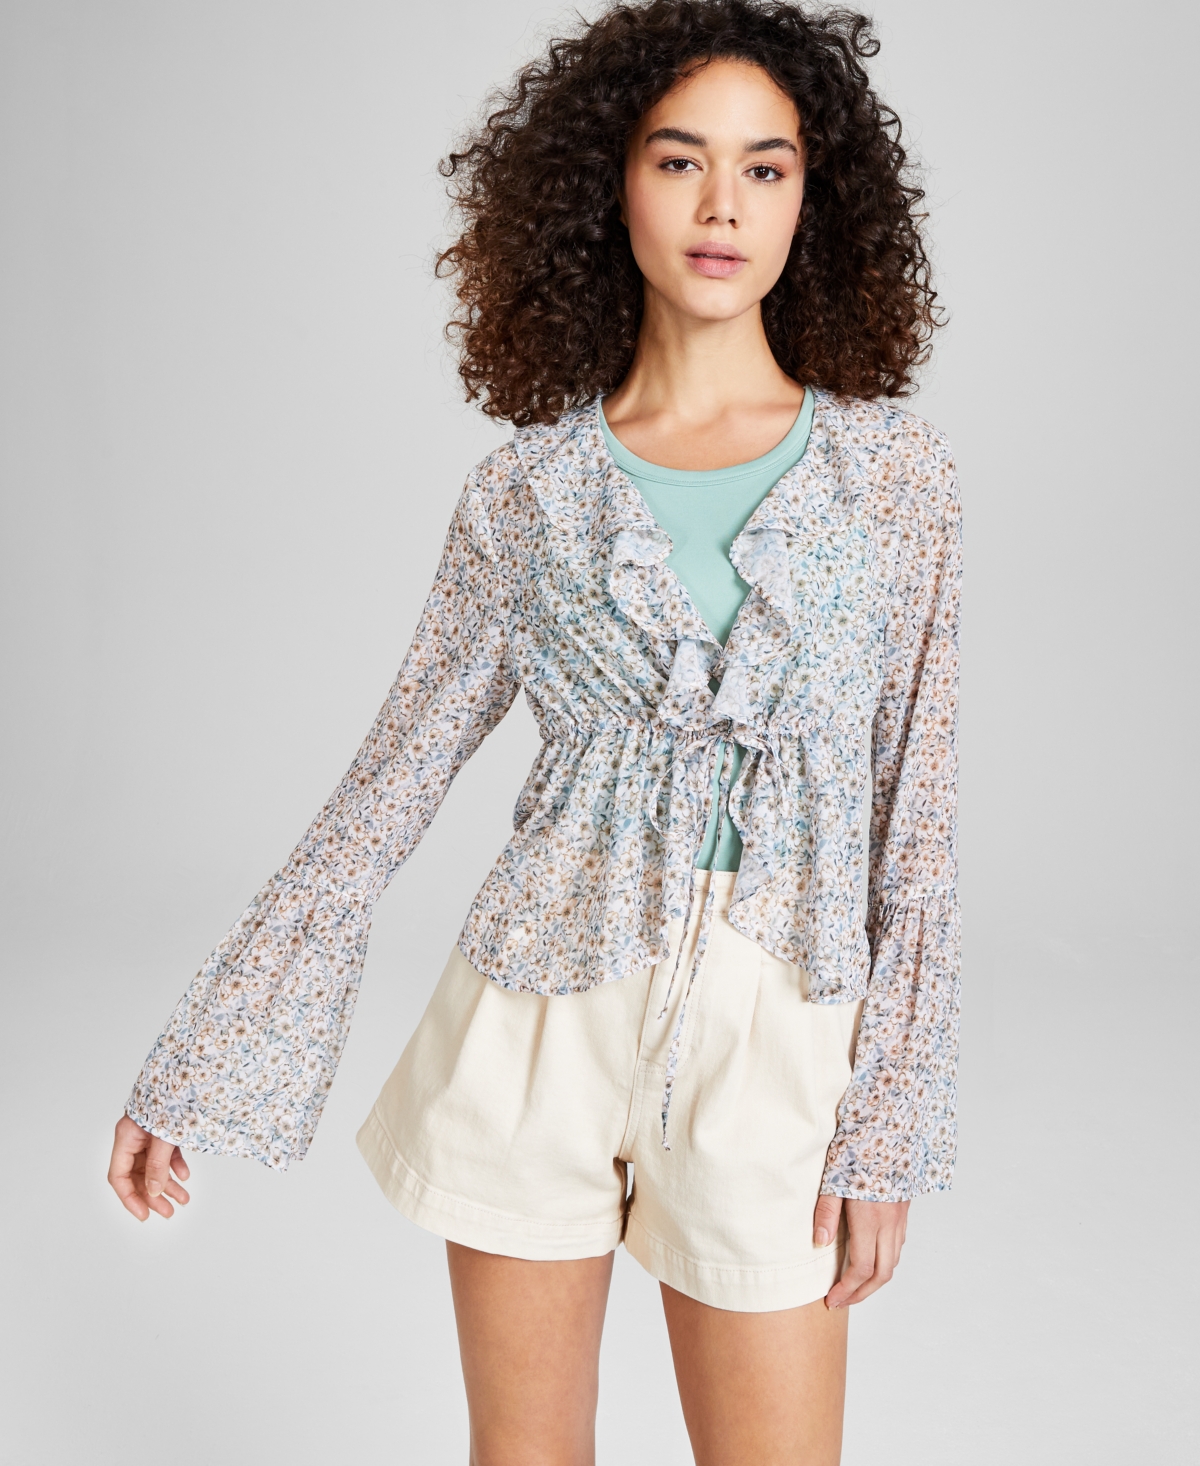 Women's Floral Print Tie-Waist Bell-Sleeve Top, Created for Macy's - Tan Floral